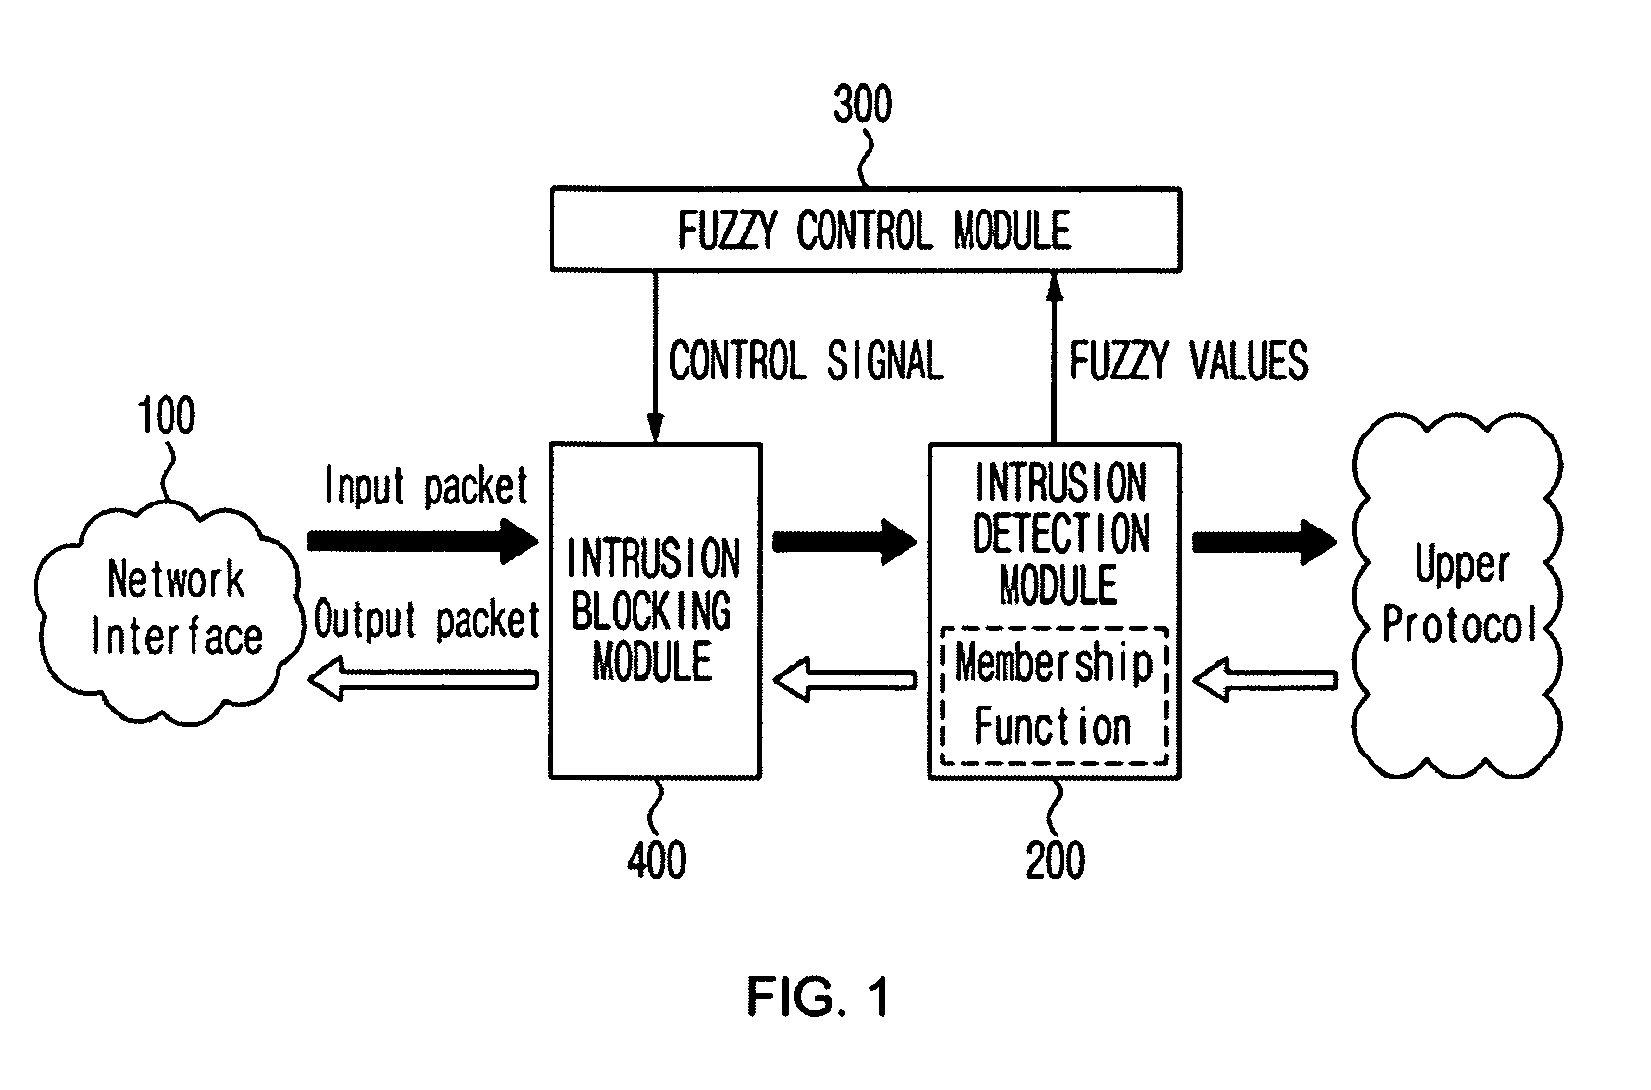 System and method for controlling abnormal traffic based on fuzzy logic